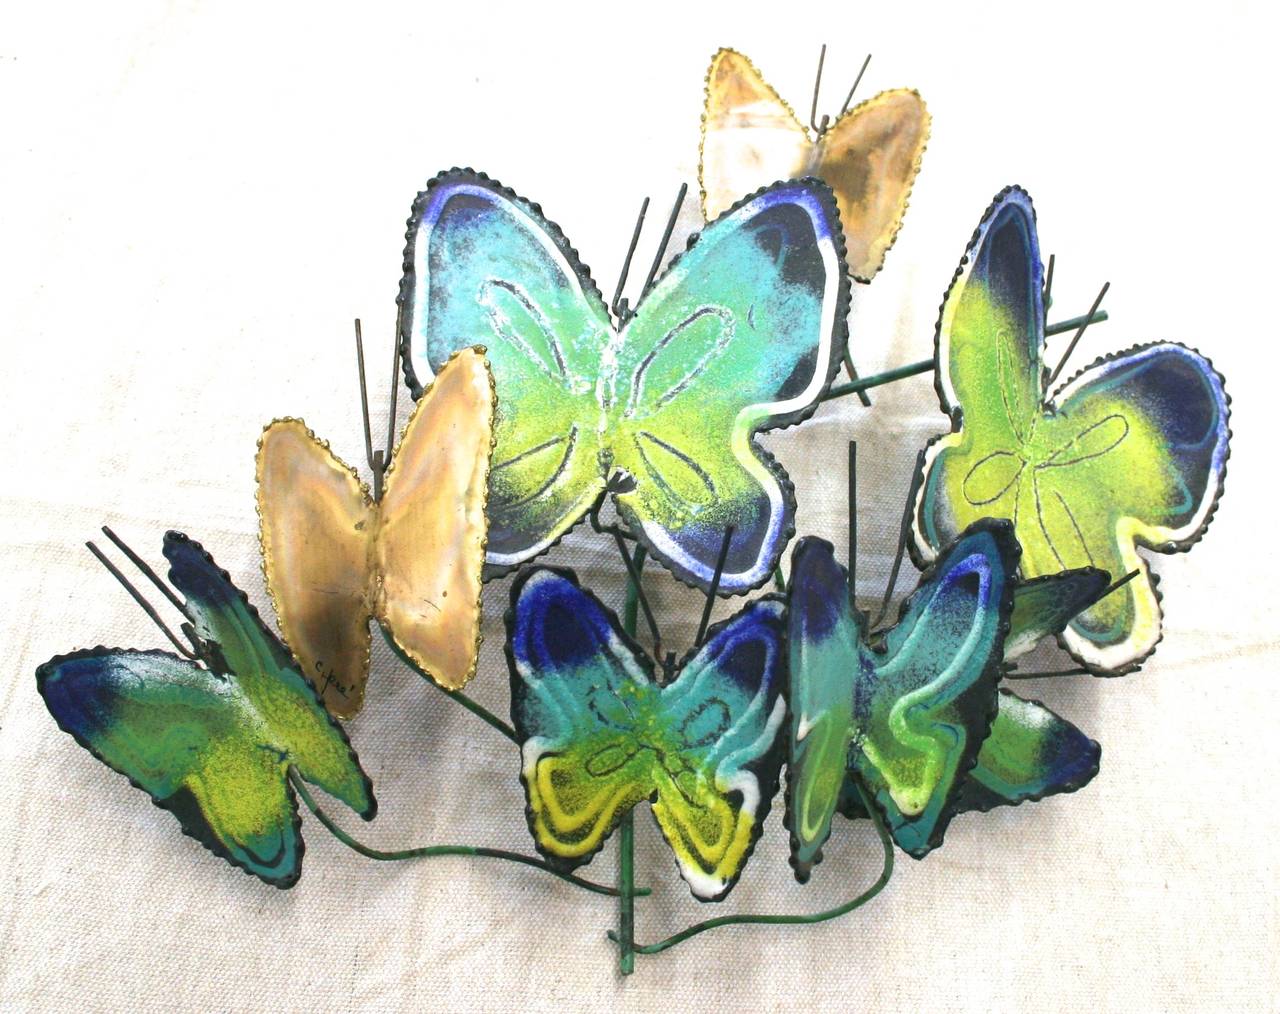 Wall-mounted butterfly sculpture signed by Curtis Jere, made of brass and enamel. Shiny brass butterflies mingle with blue, green and yellow enameled hues. This playful piece adds a touch of motion to your wall. Mounts to wall with green wire frame.